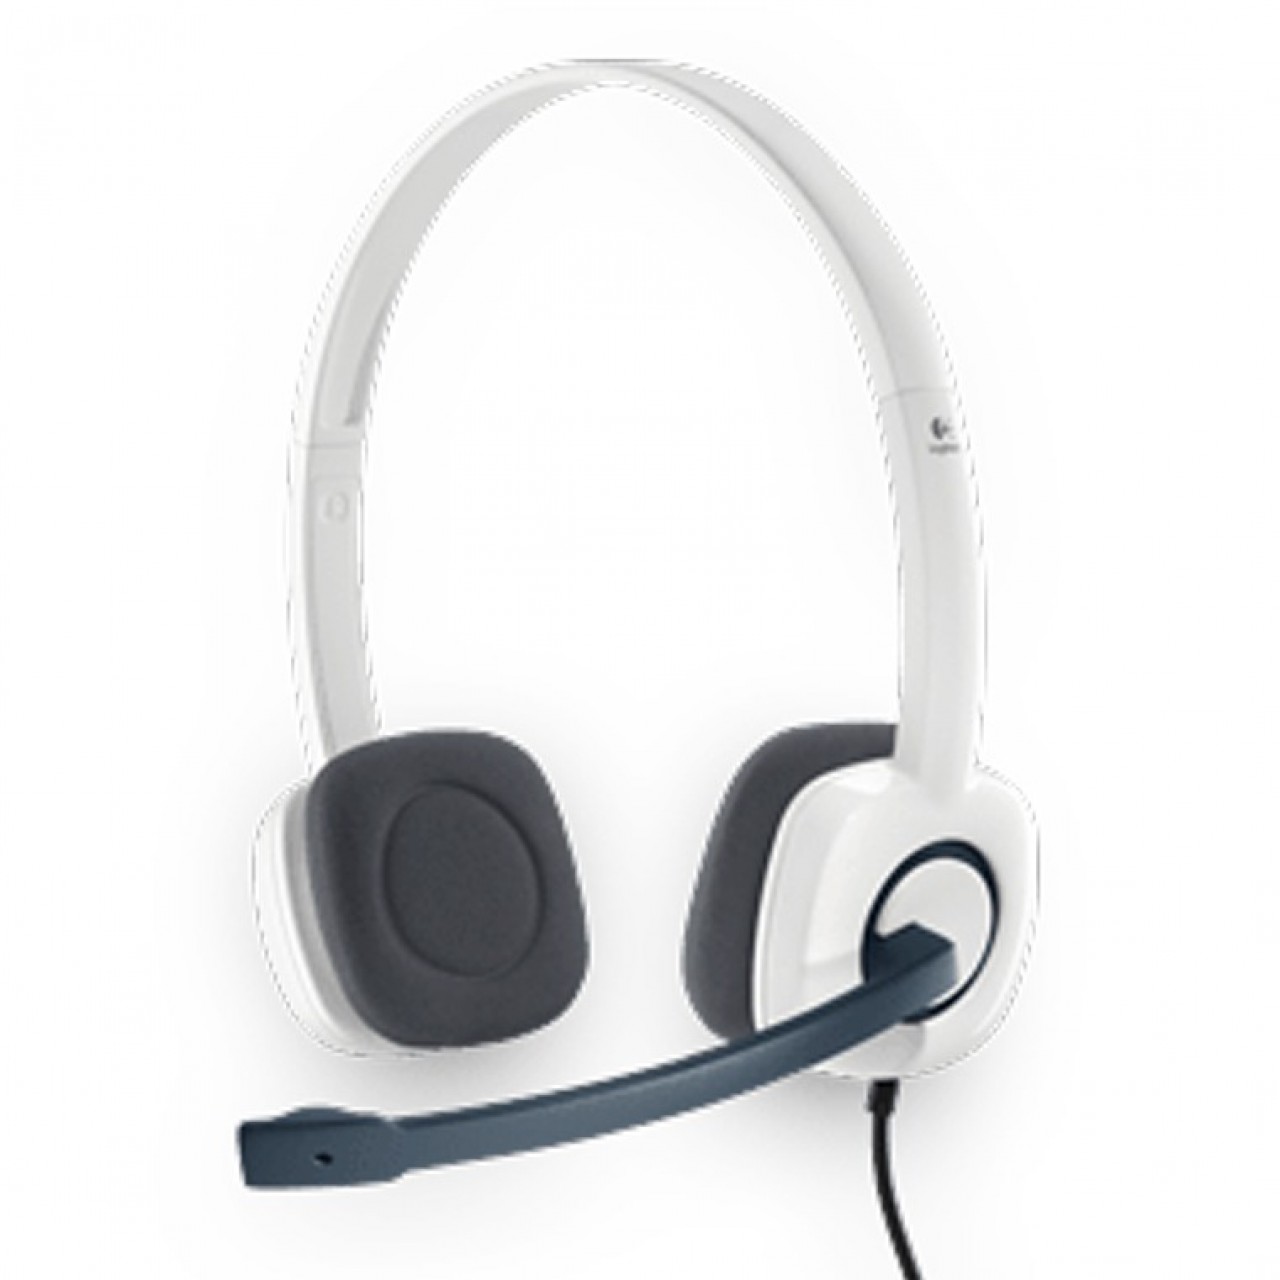 15. Logitech Stereo Headset H150 – Rotatable – Noise Cancellation -  Cloud White (981-000349)